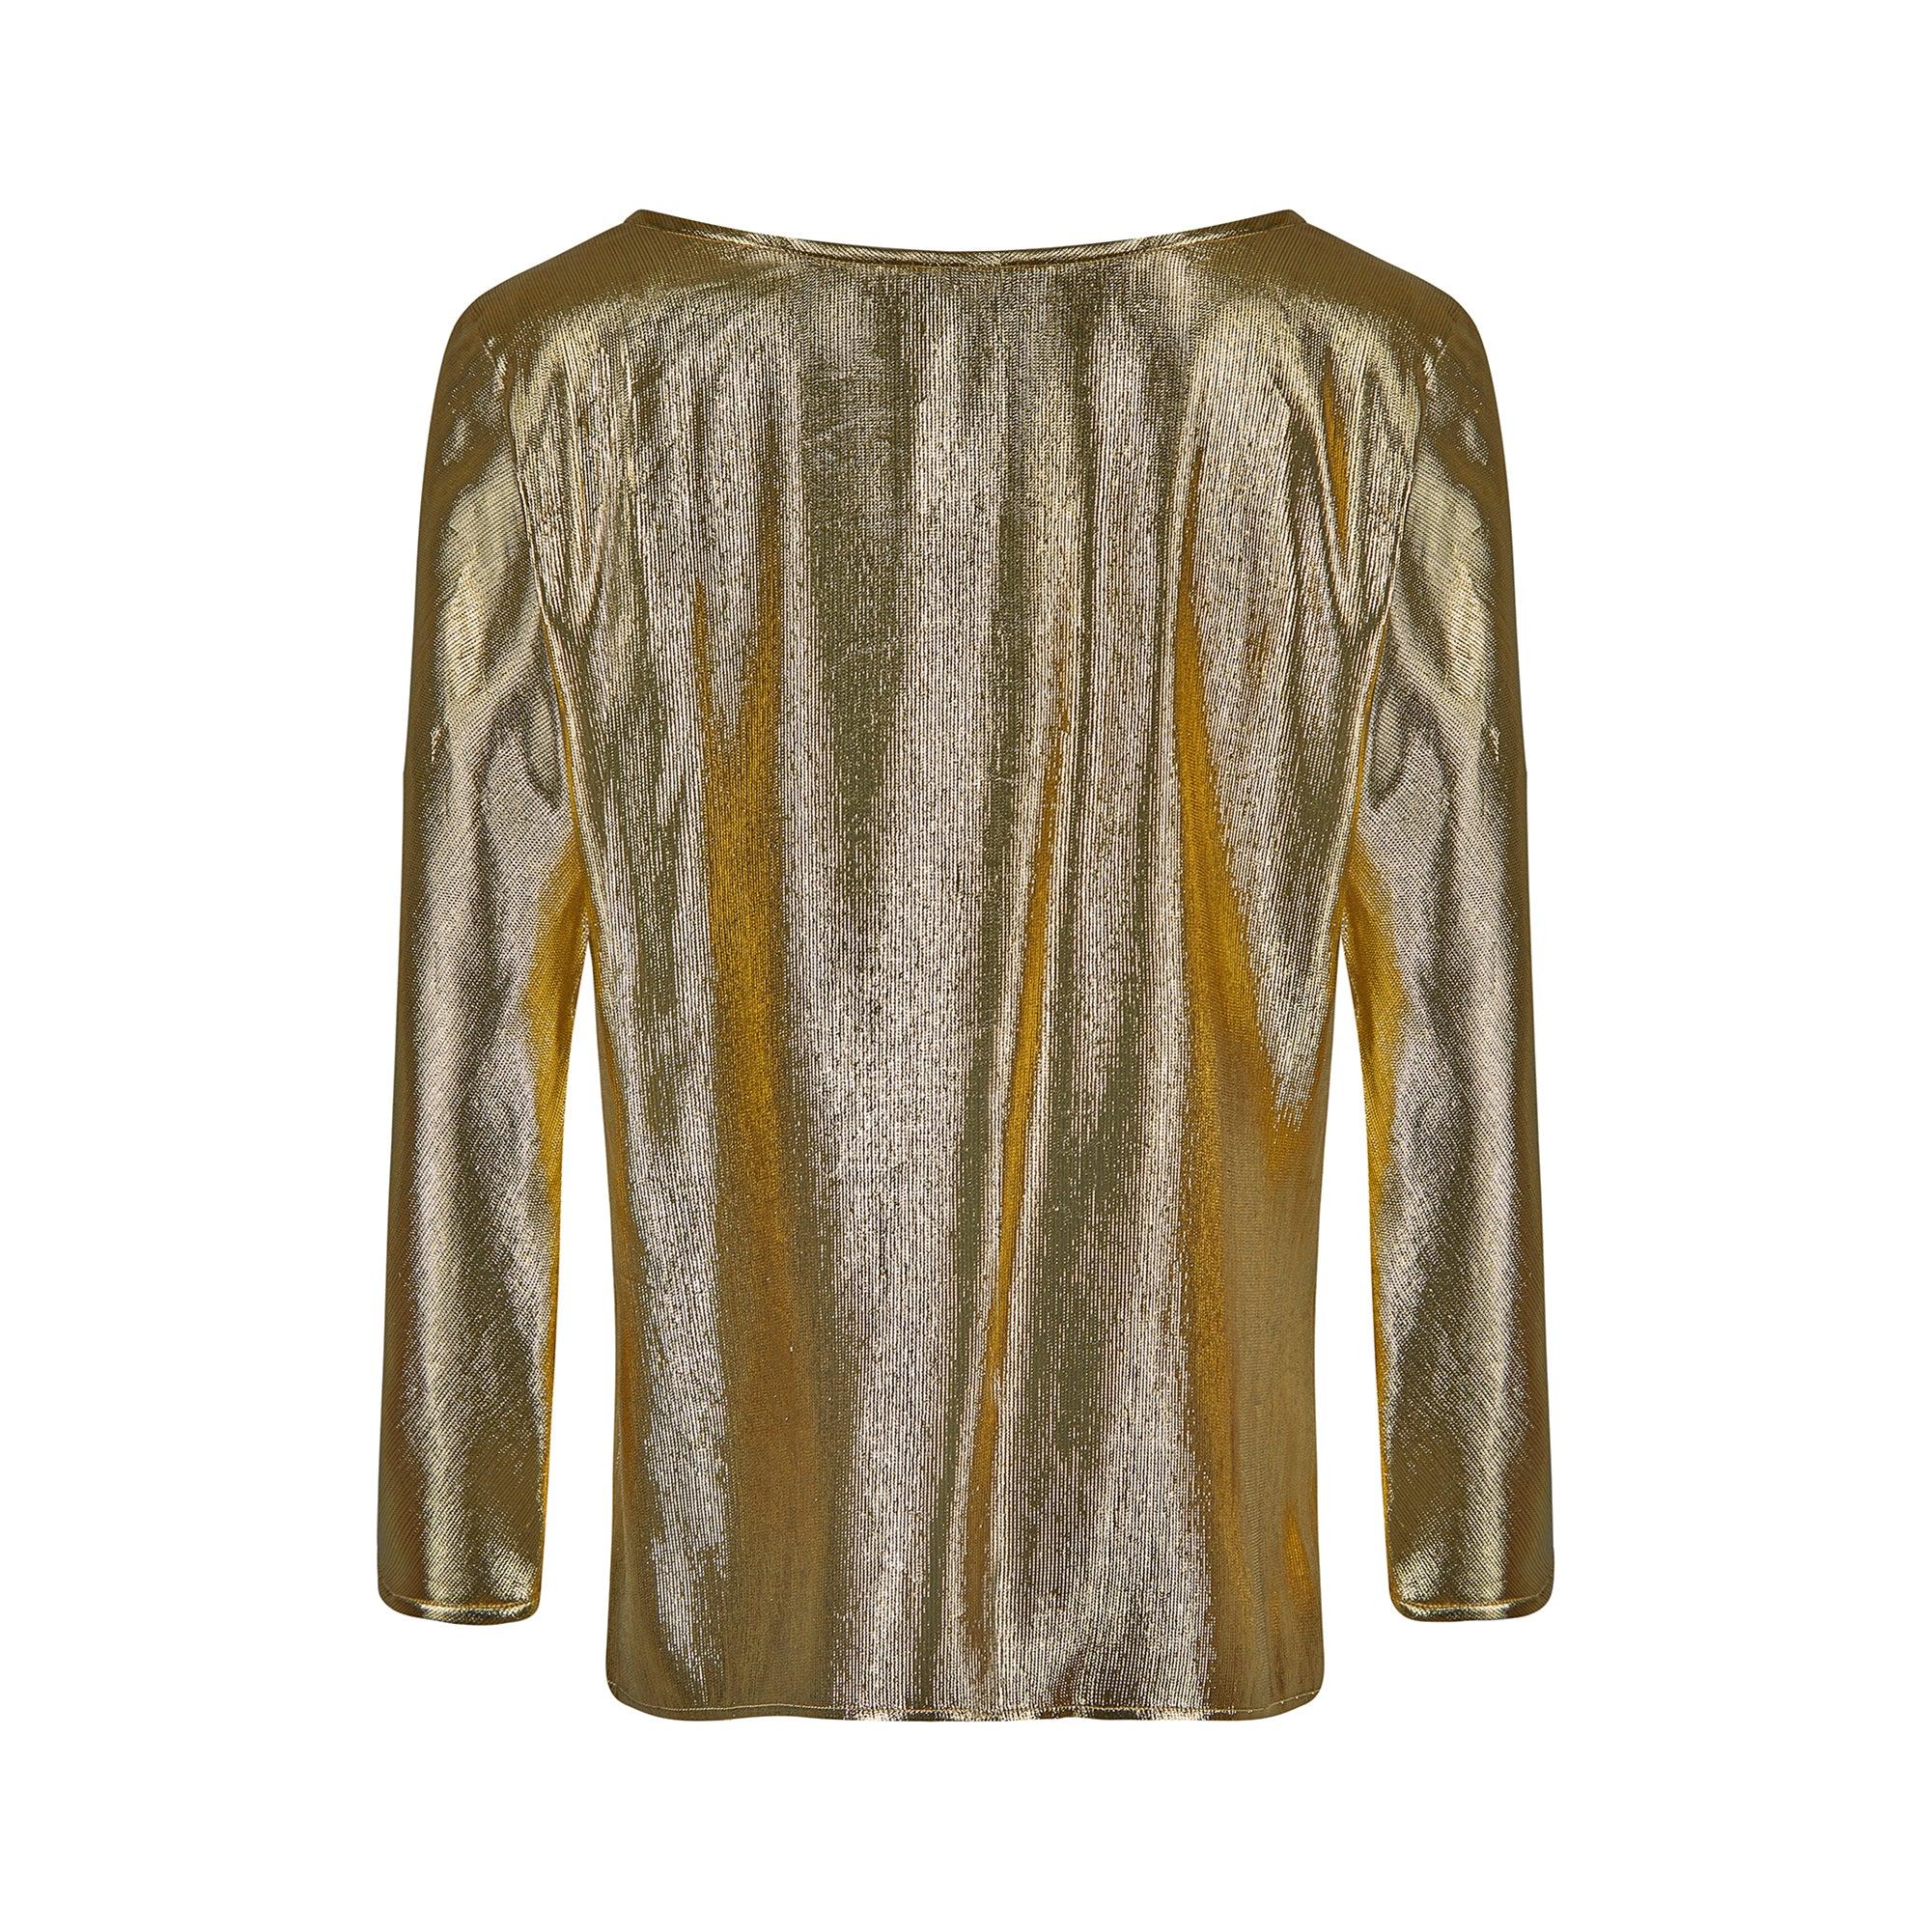 1991 Documented Yves Saint Laurent Gold Metallic Lame Top In Excellent Condition For Sale In London, GB